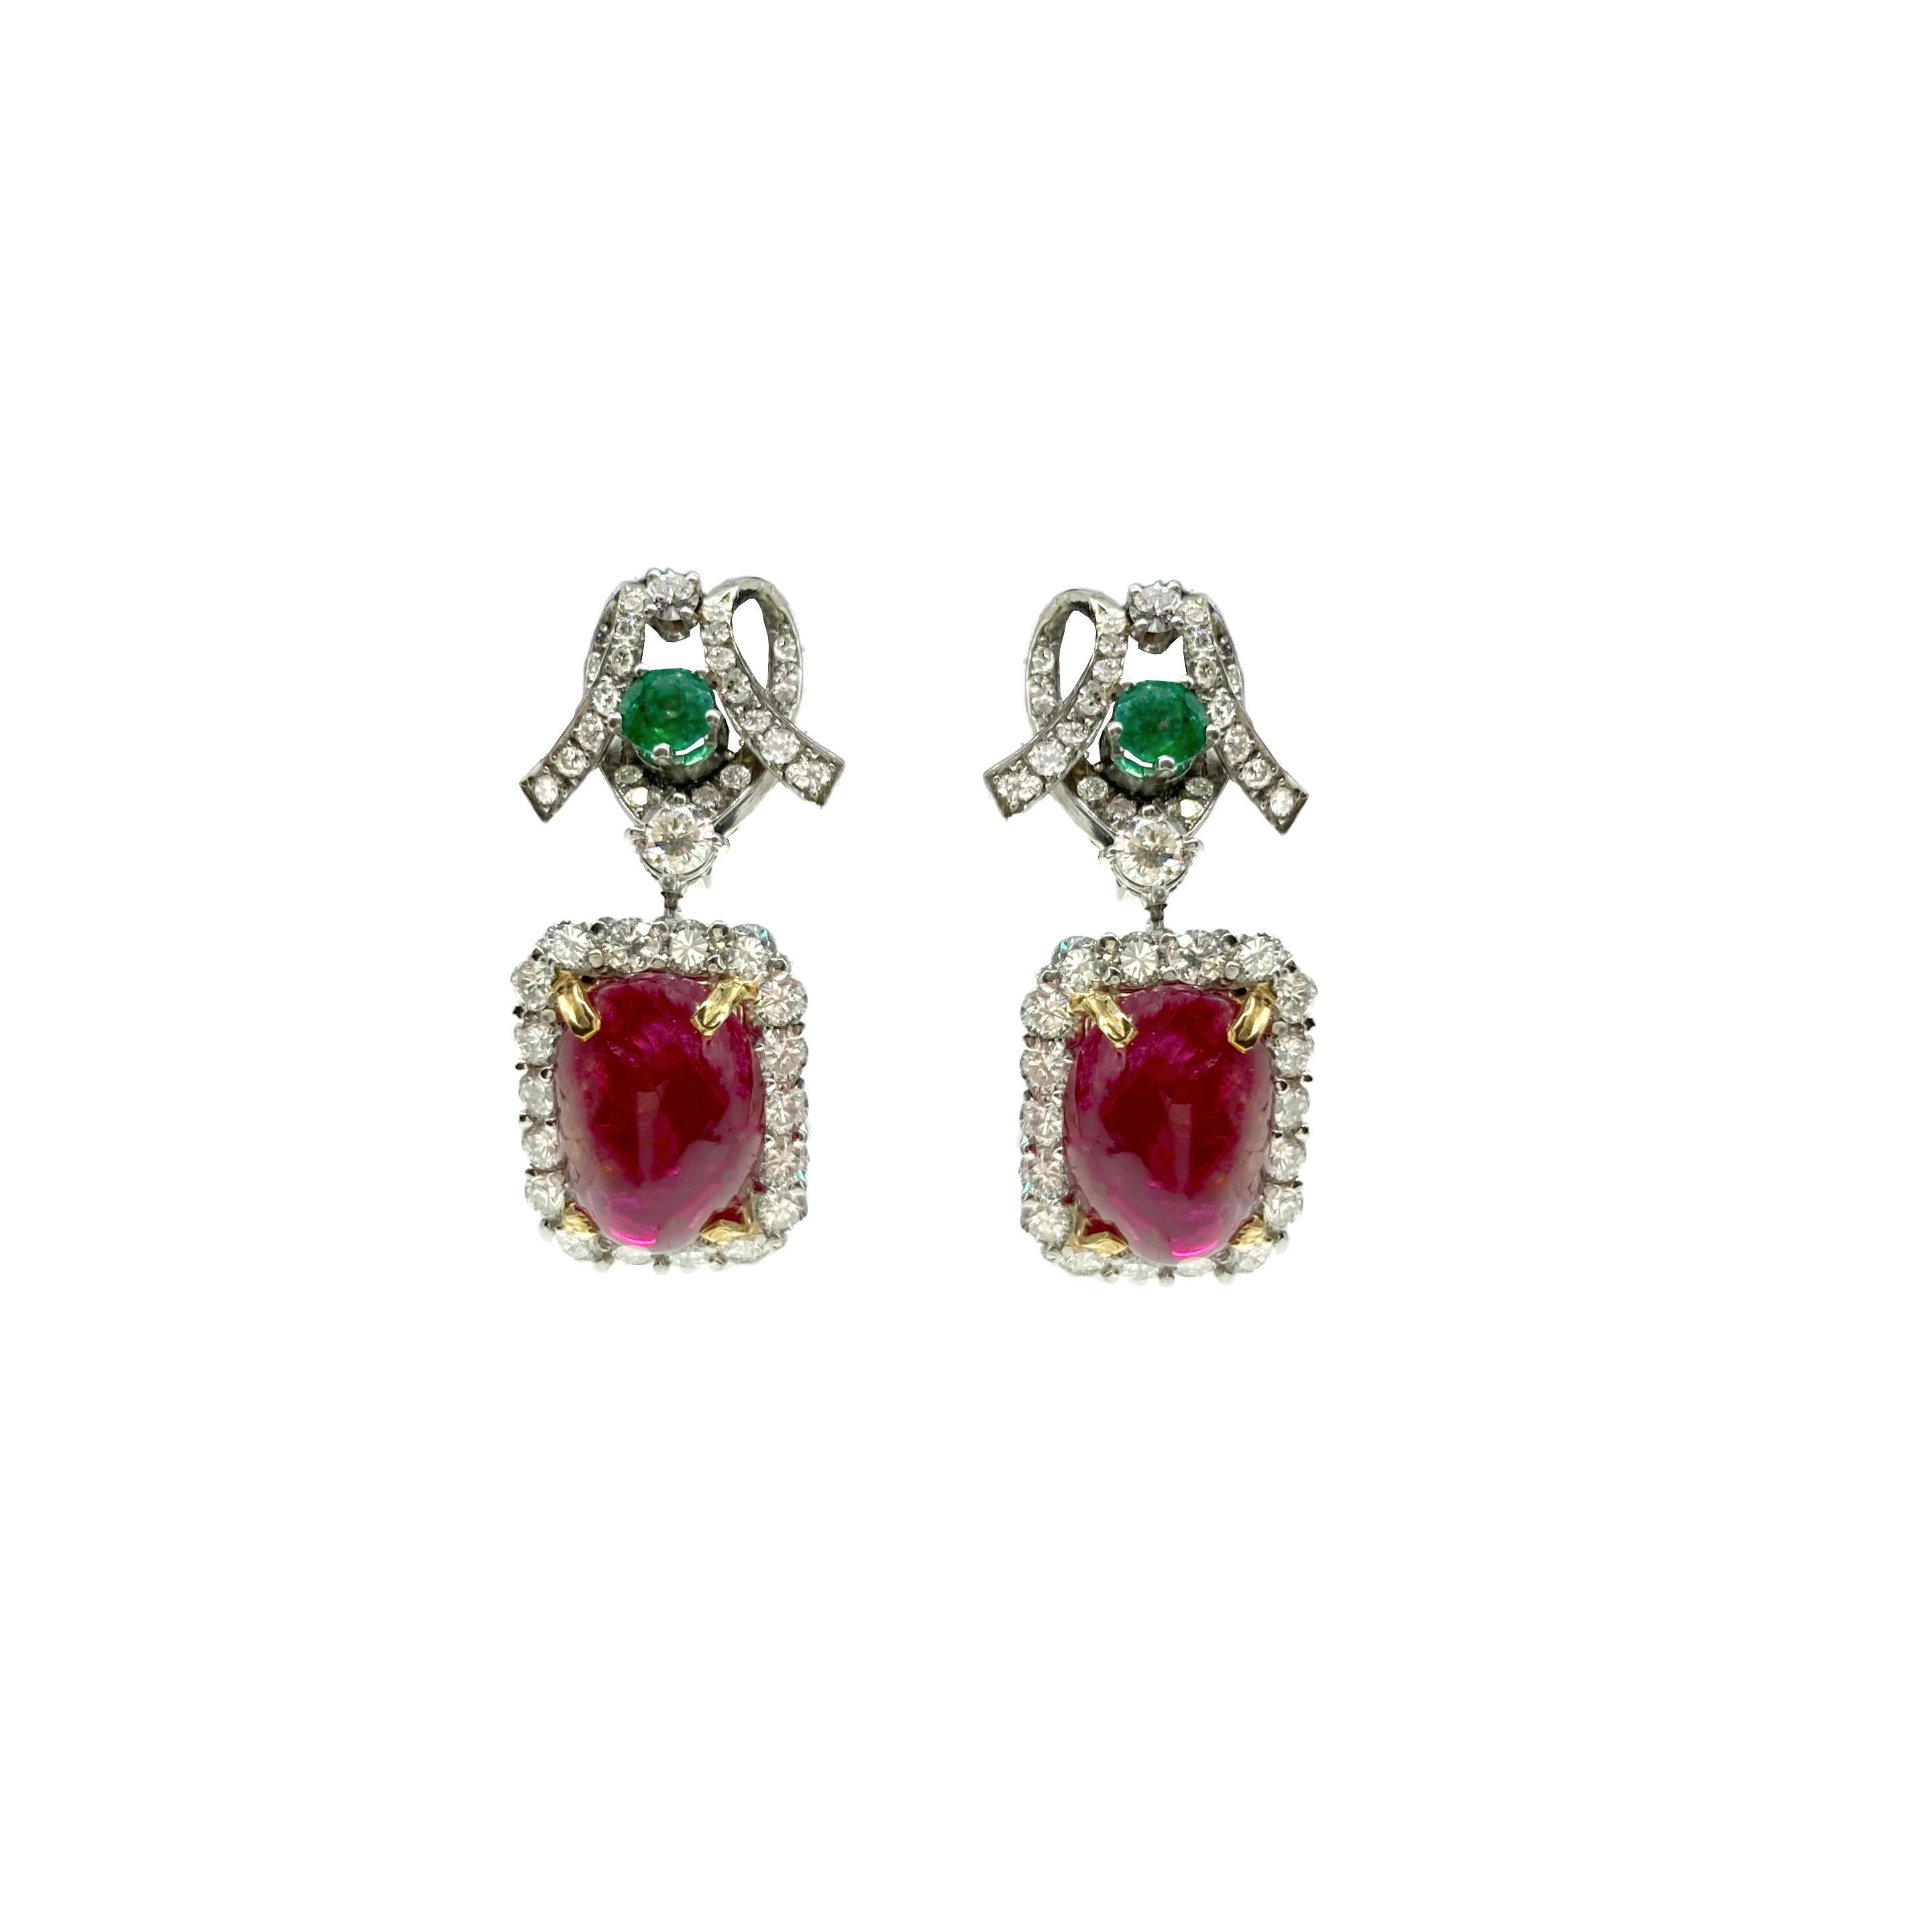 A beautiful pair of white gold drop earrings embellished with emeralds and diamonds, each suspending an 11.61 and 11.71 carat cabochon spinel. Circa 1960s.